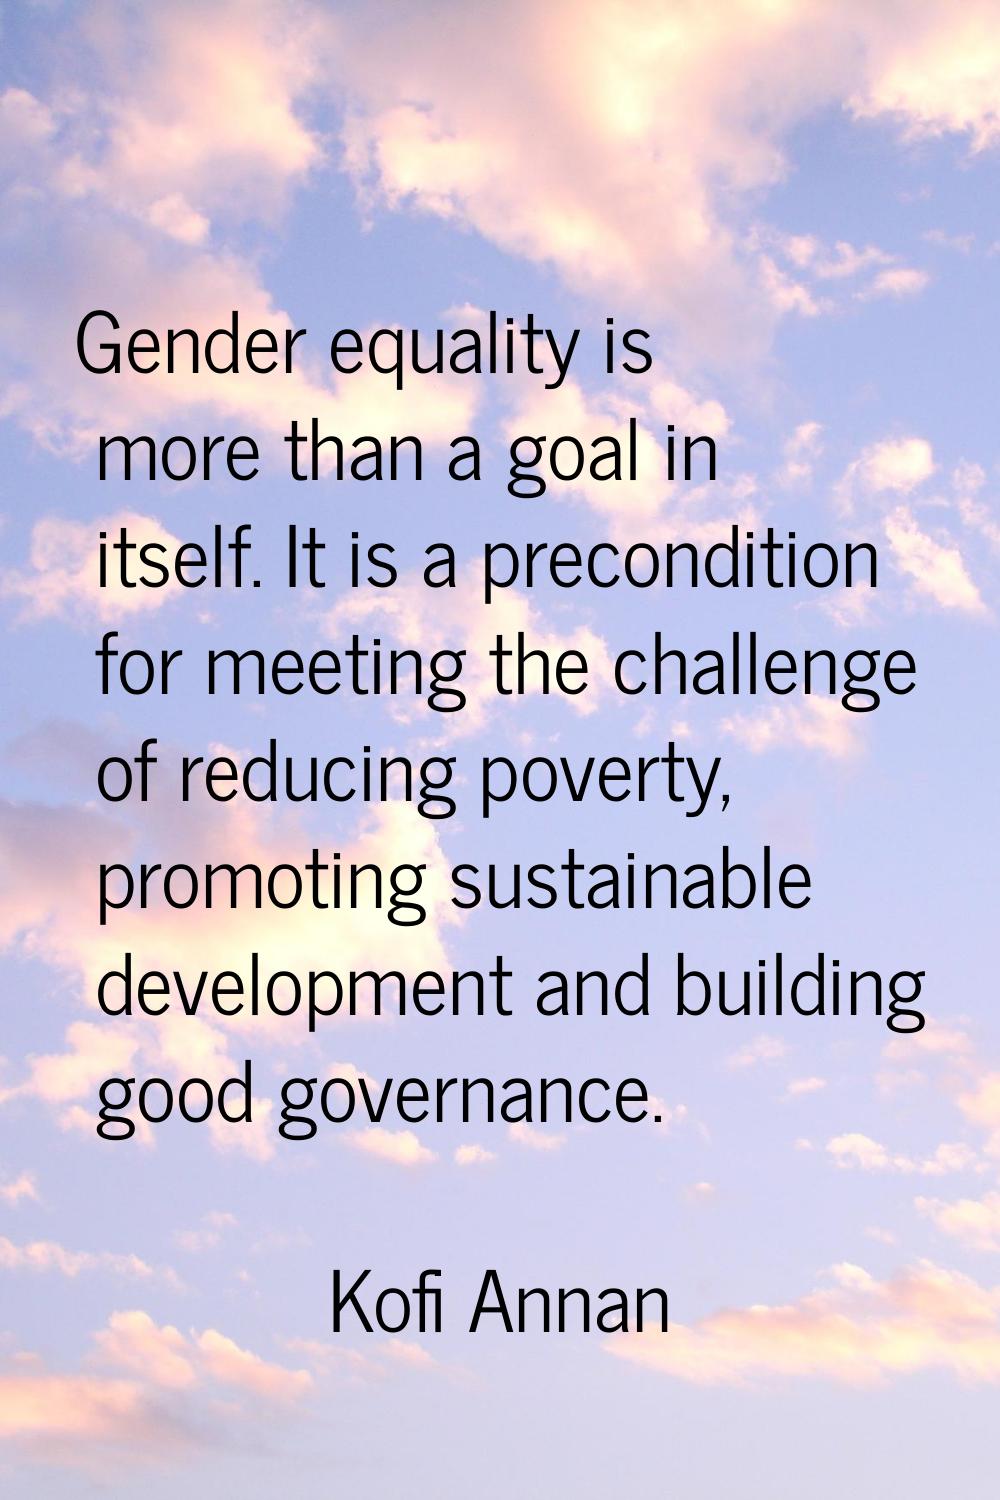 Gender equality is more than a goal in itself. It is a precondition for meeting the challenge of re